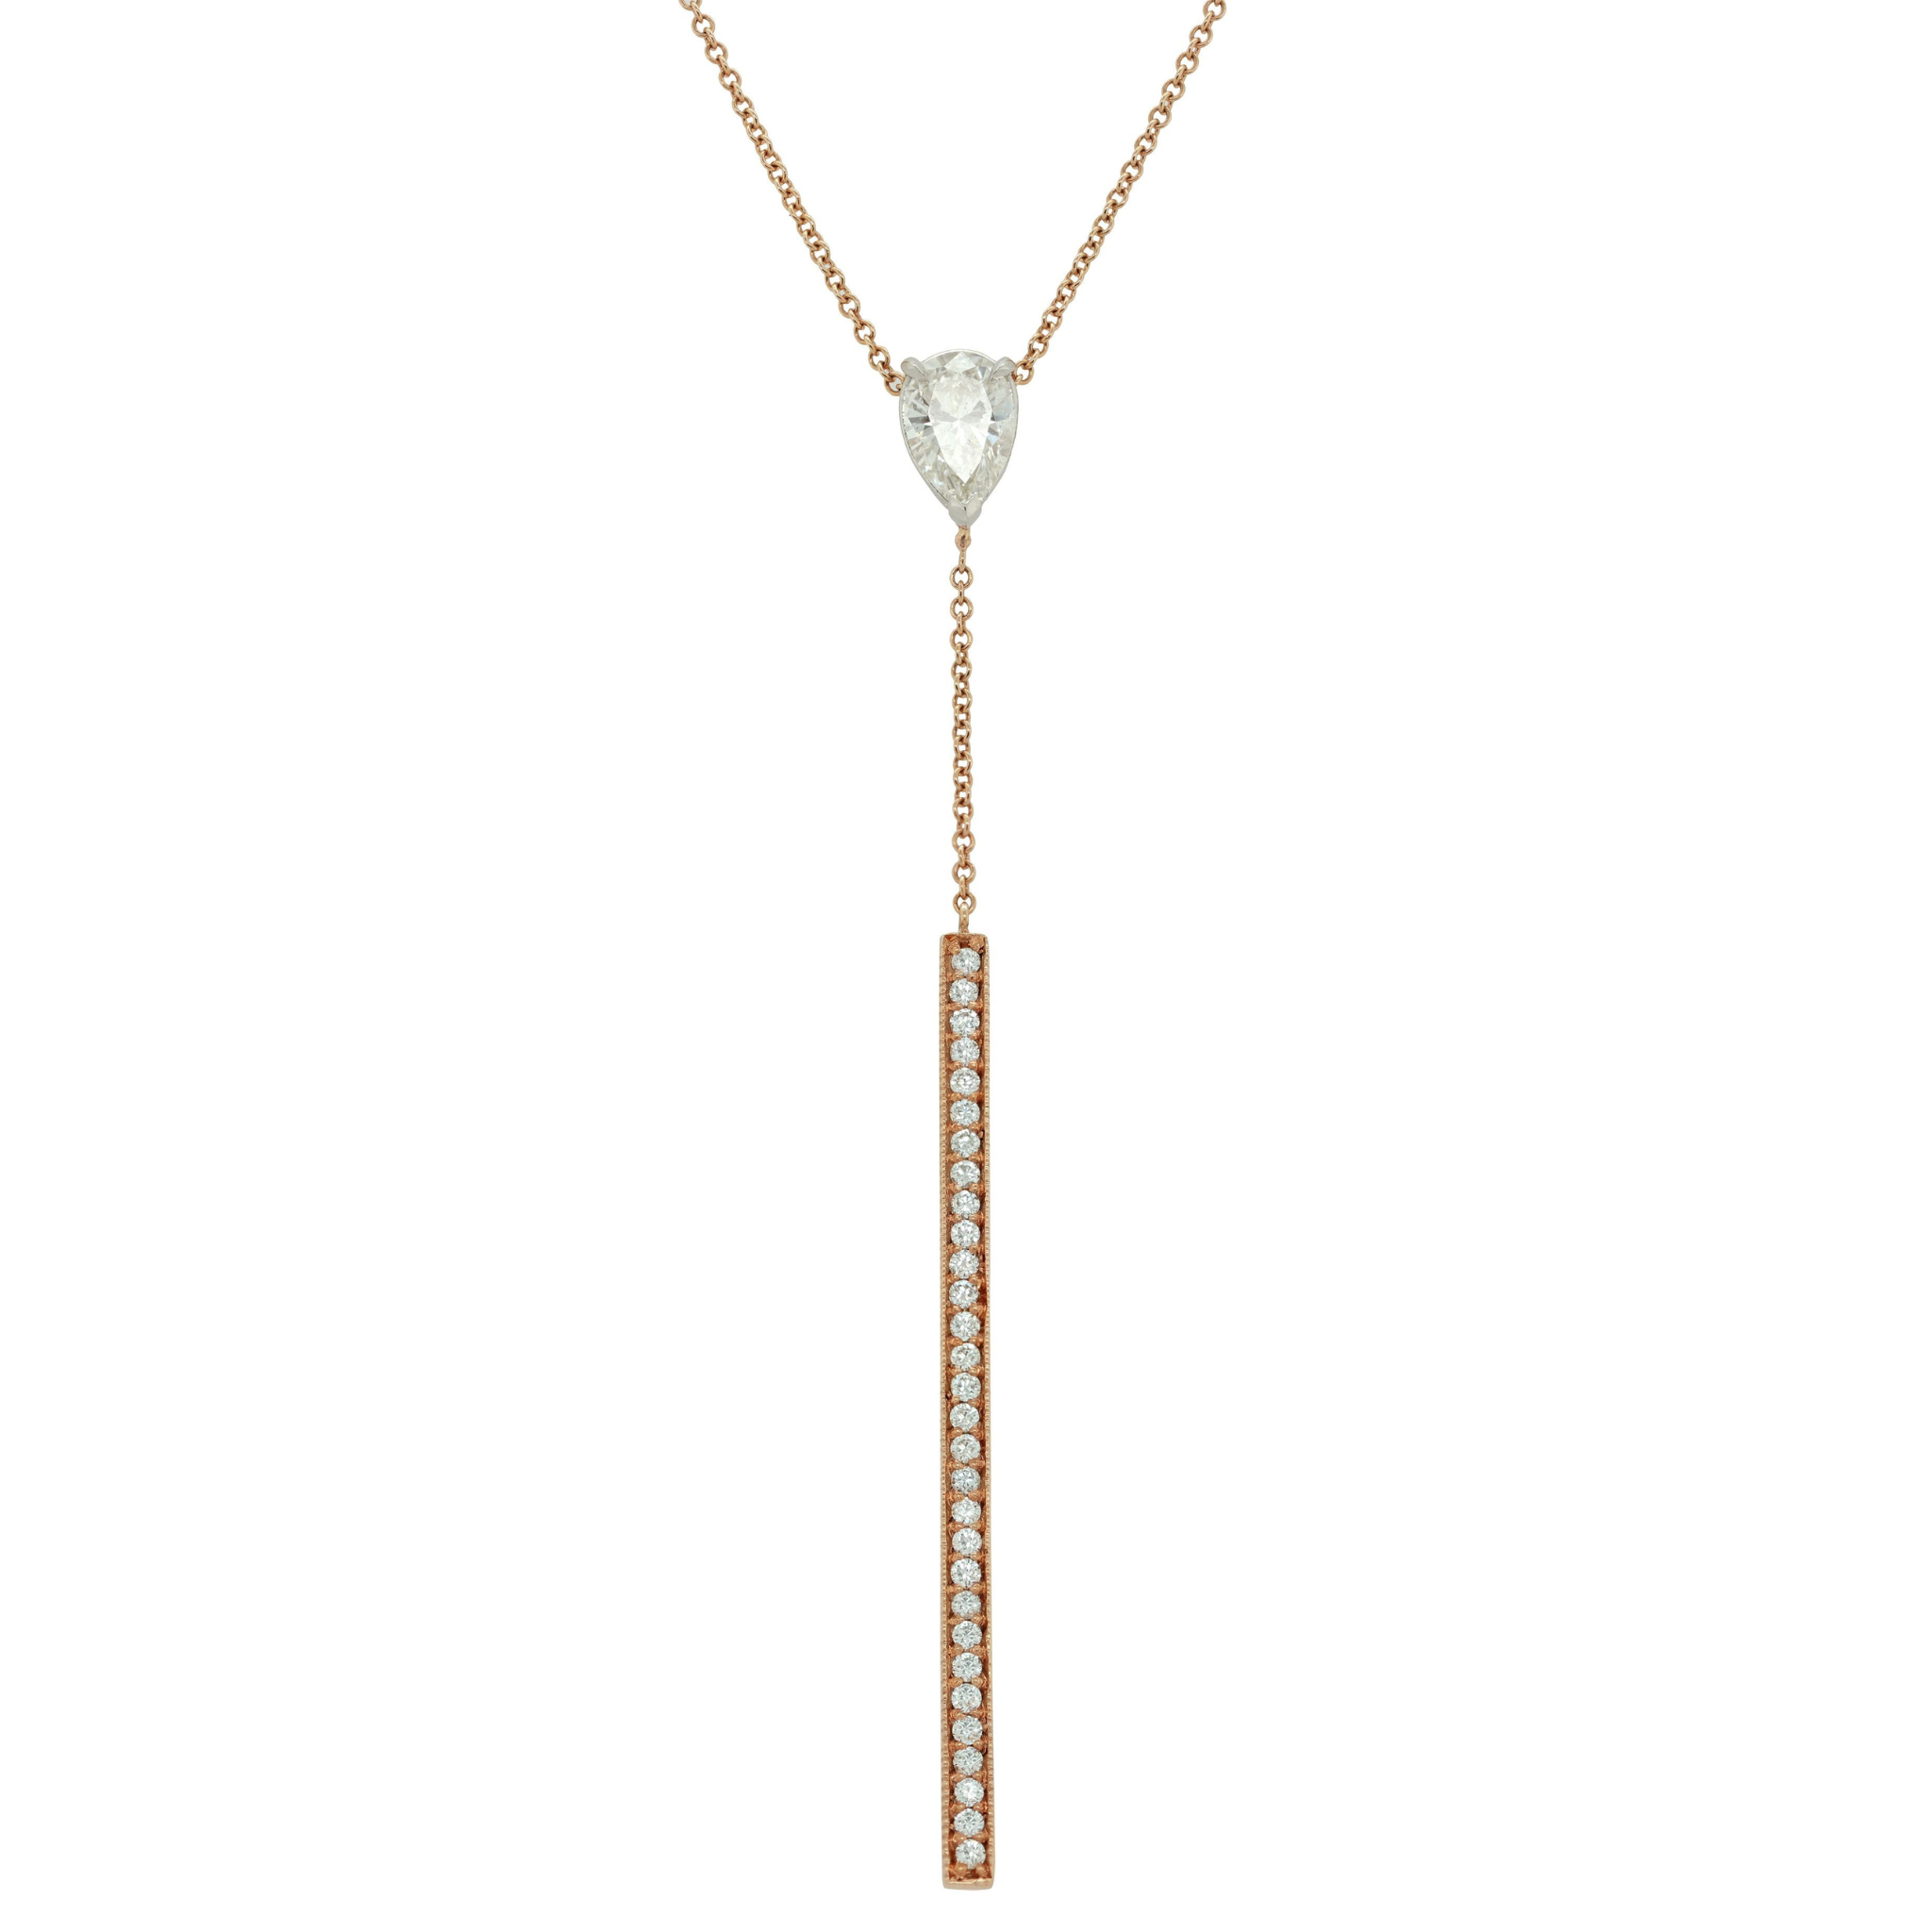 18kt Rose Gold Lariat Diamond Necklace with 1.11 Cts.jpgv